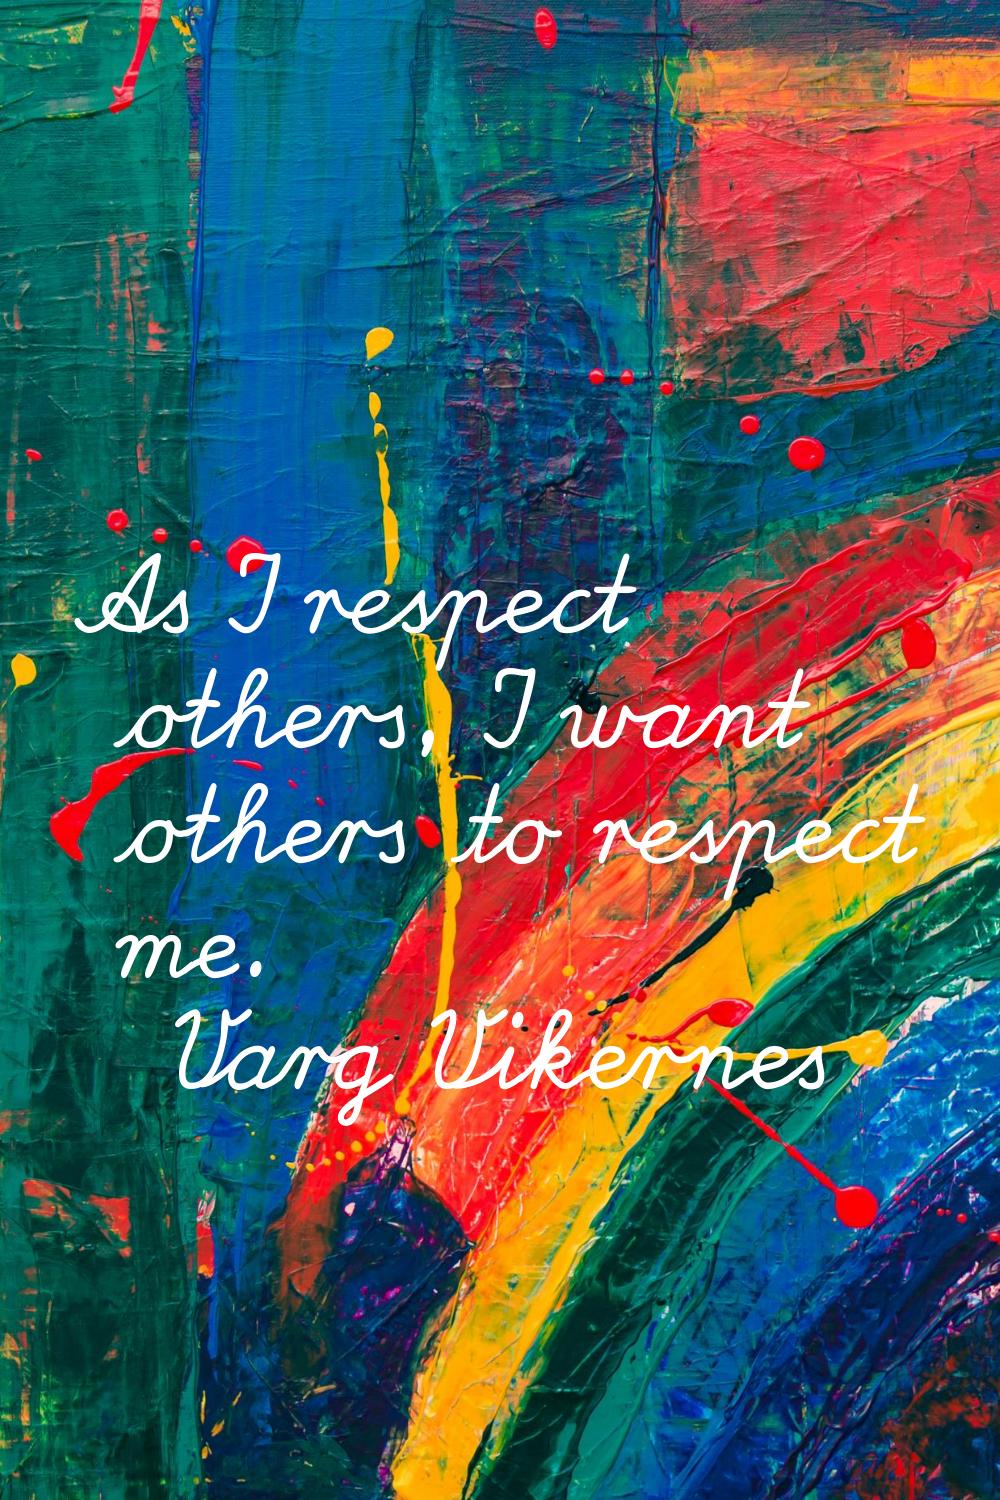 As I respect others, I want others to respect me.